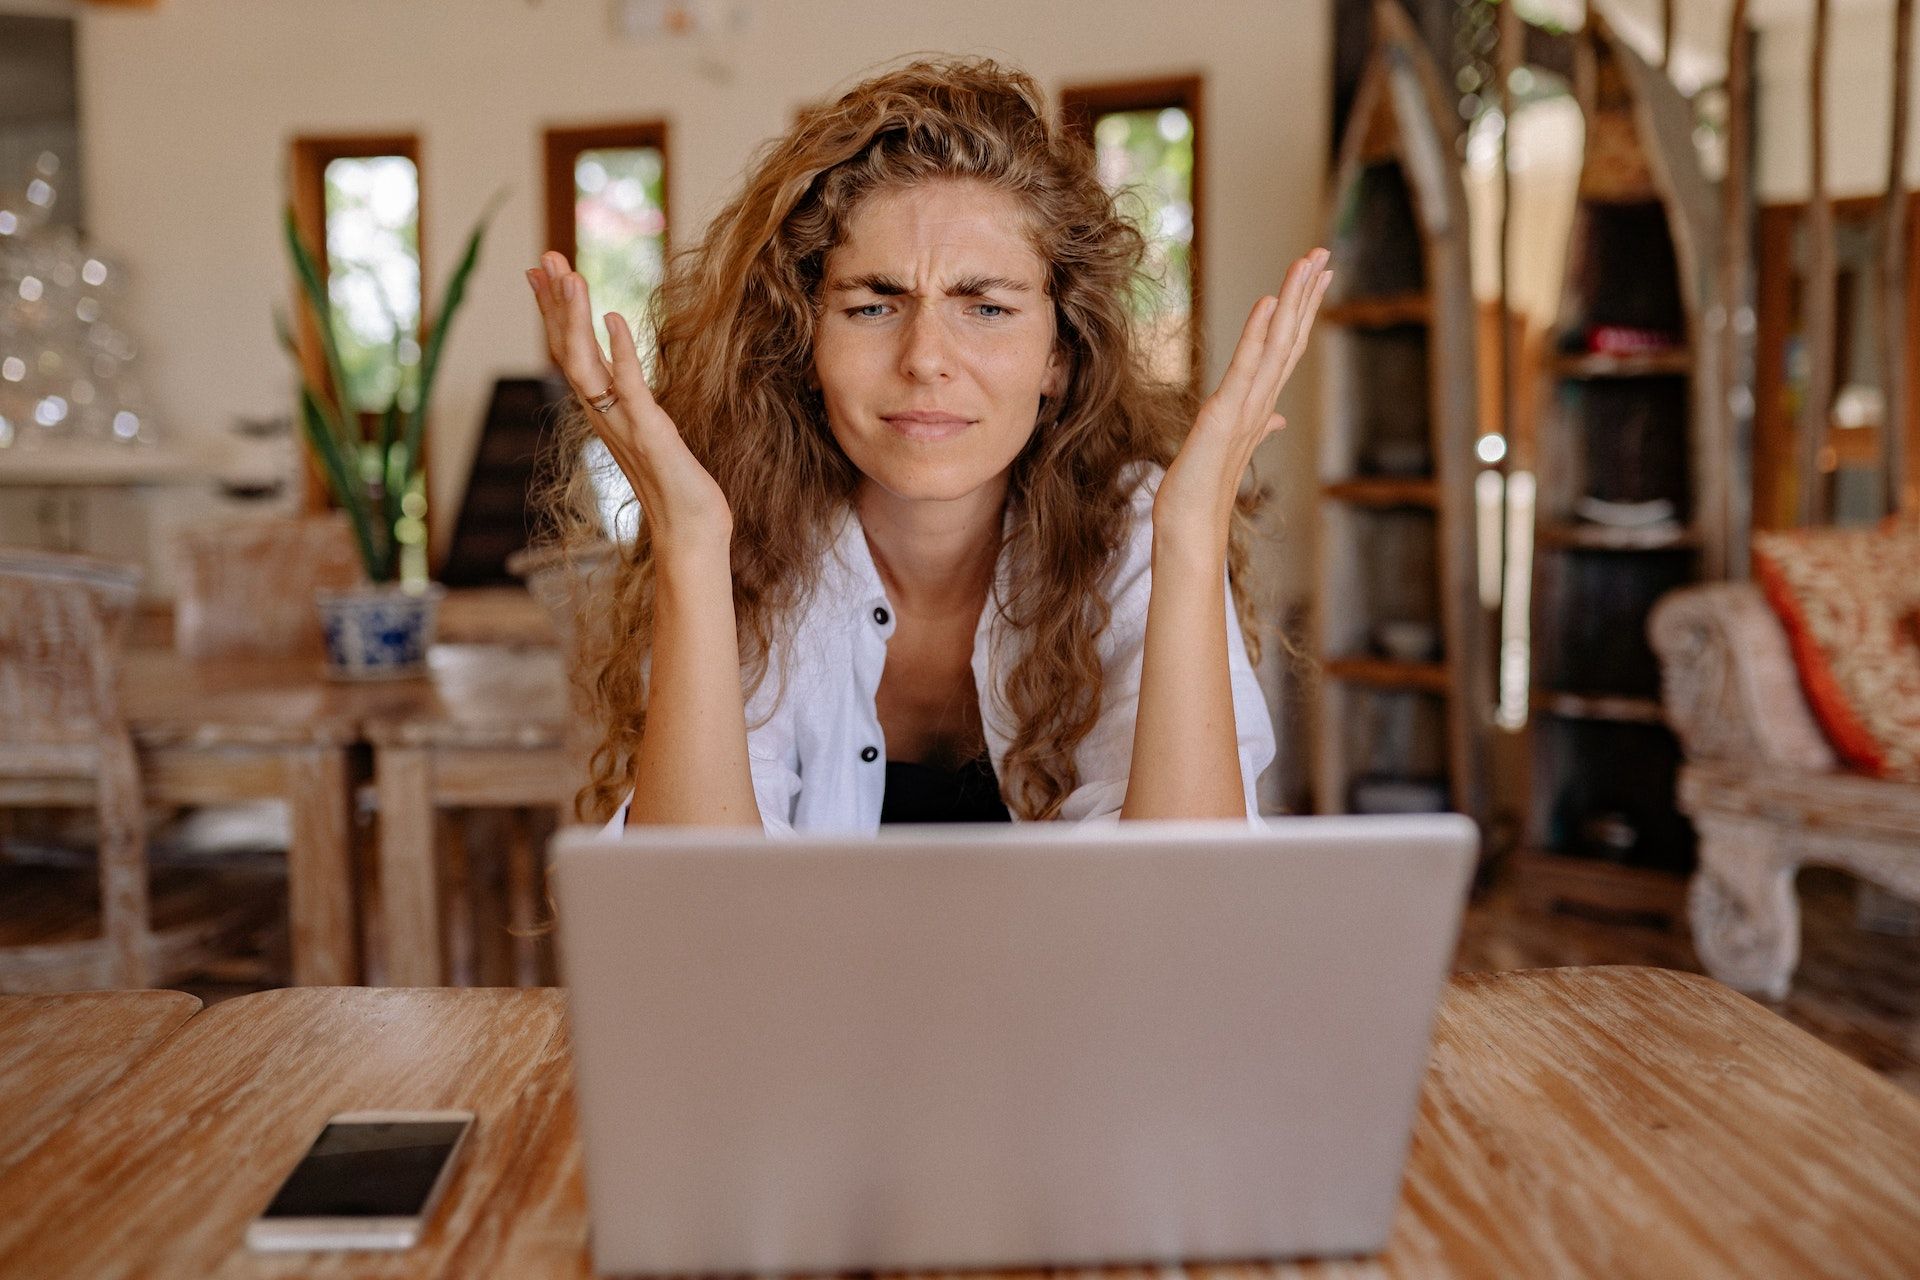 woman frustrated at response from computer